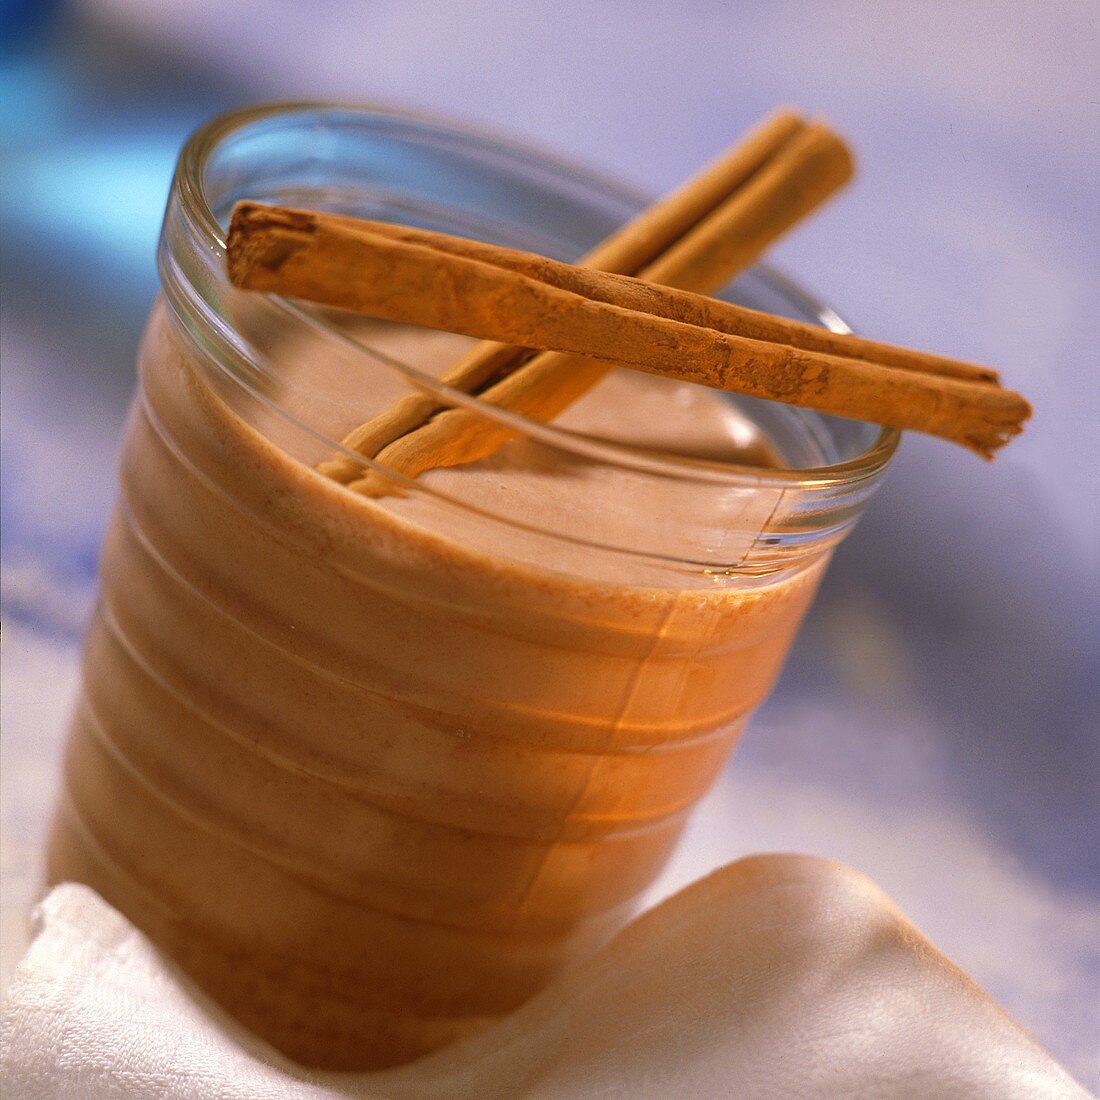 Hot chocolate in a glass with cinnamon sticks